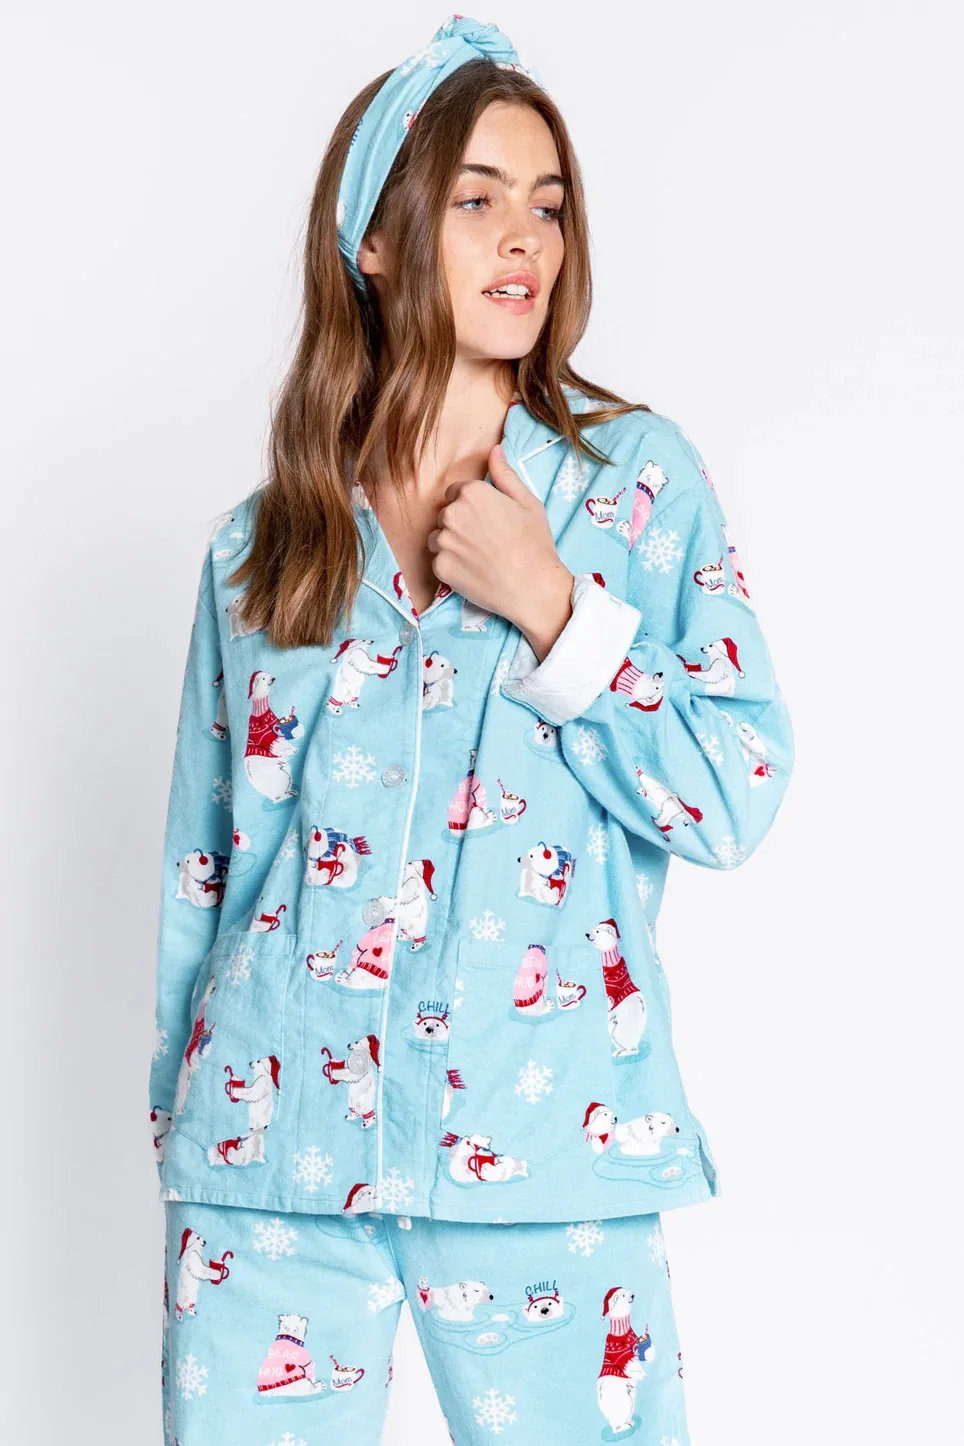 Room Wear Ladies Pajamas Women Home Sleepwear Long Sleeve Trousers Set Autumn and Winter Warm Thick Cotton winter simple women pajamas set cartoon lapel pure cotton double faced home wear comfy long sleeve two piece set lady nightie